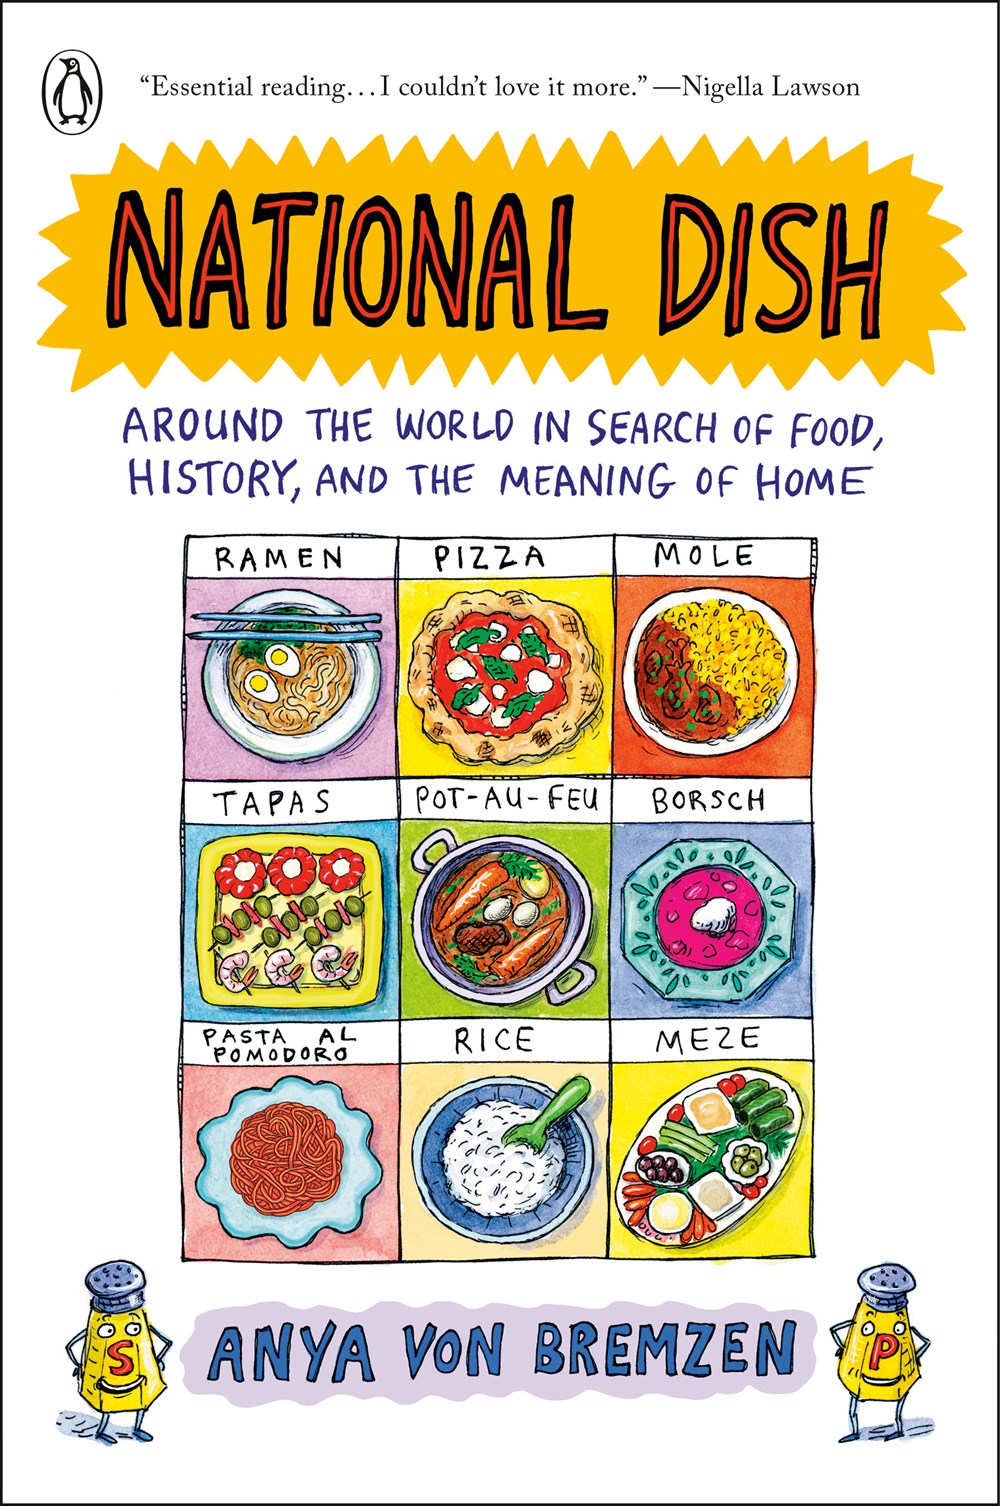 National Dish: Around the World in Search of Food, History, and the Meaning of Home by Anya von Bremzen